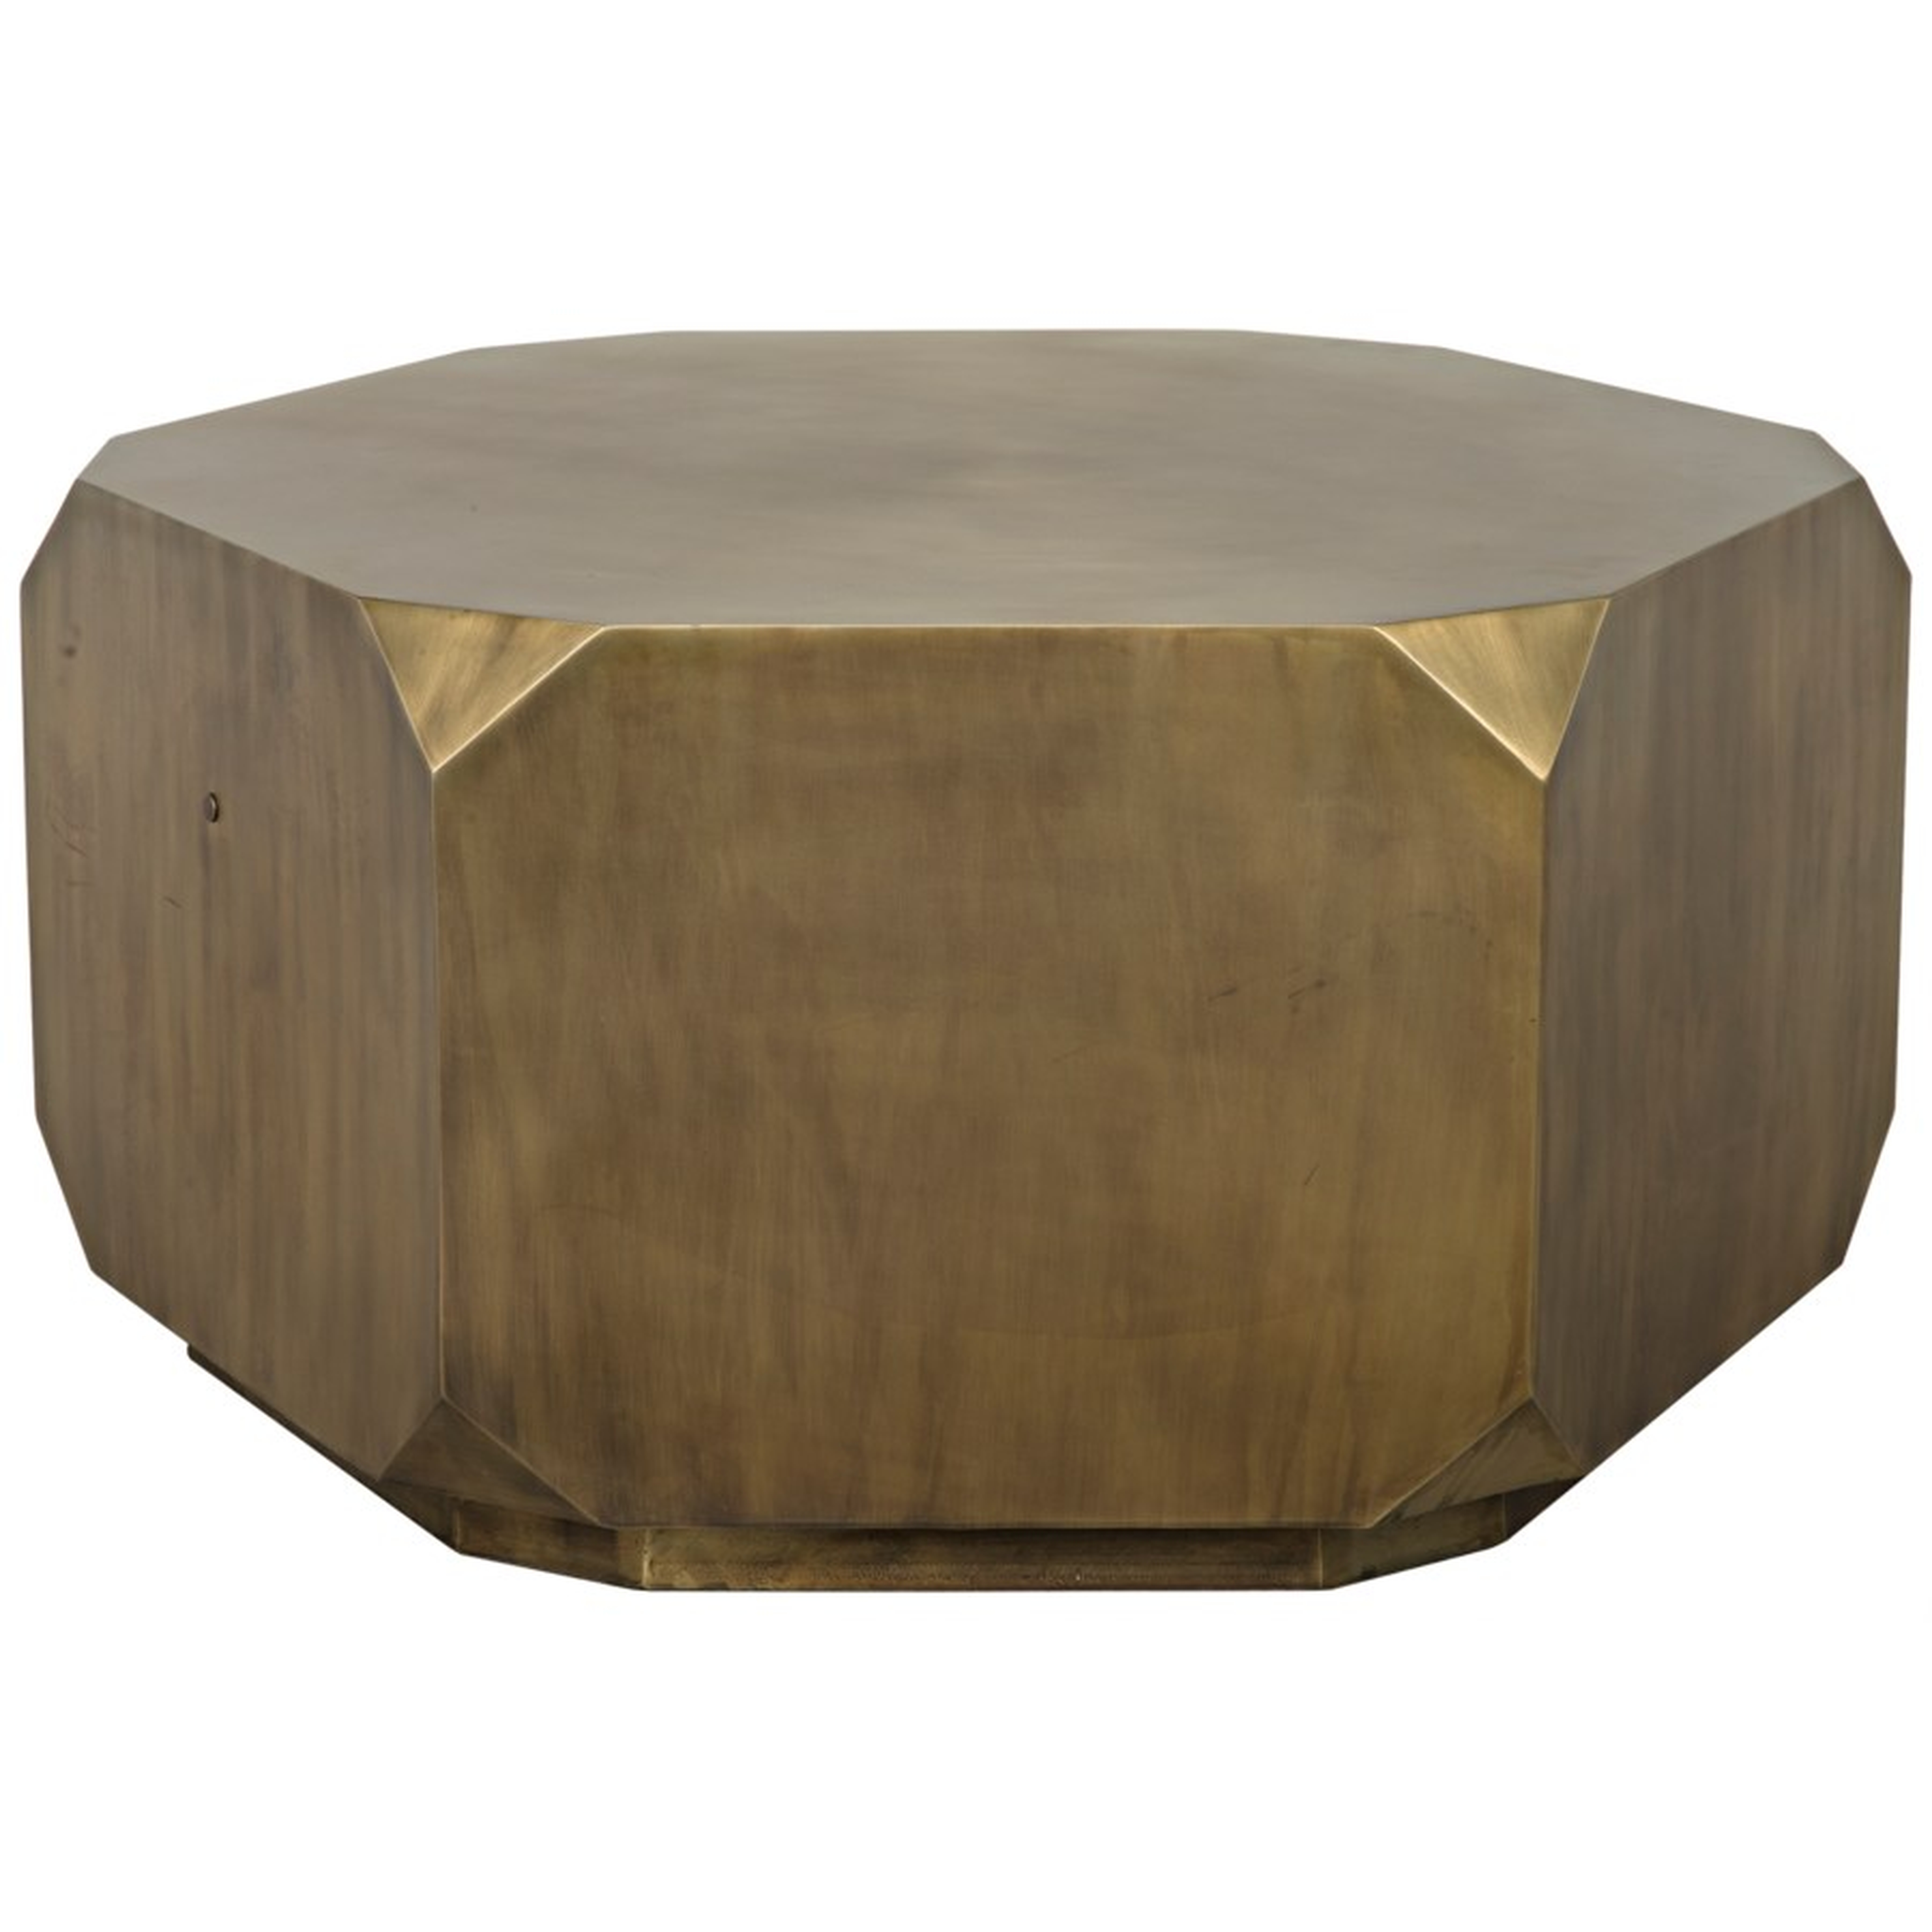 Garry Modern Classic Antique Brass Coffee Table - Kathy Kuo Home